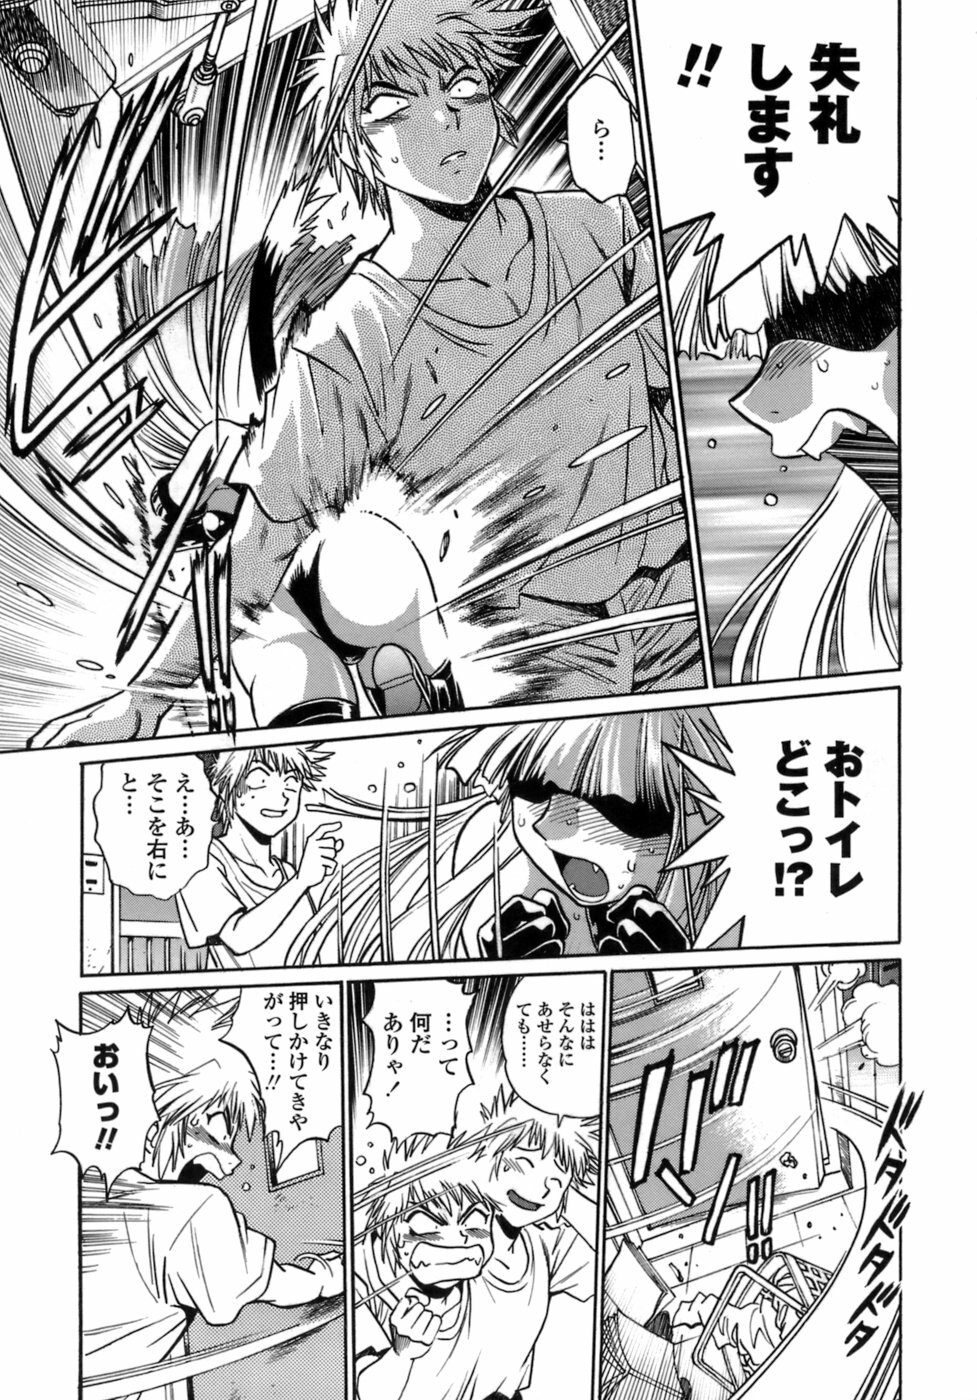 [Manabe Jouji] Tail Chaser 1 page 7 full